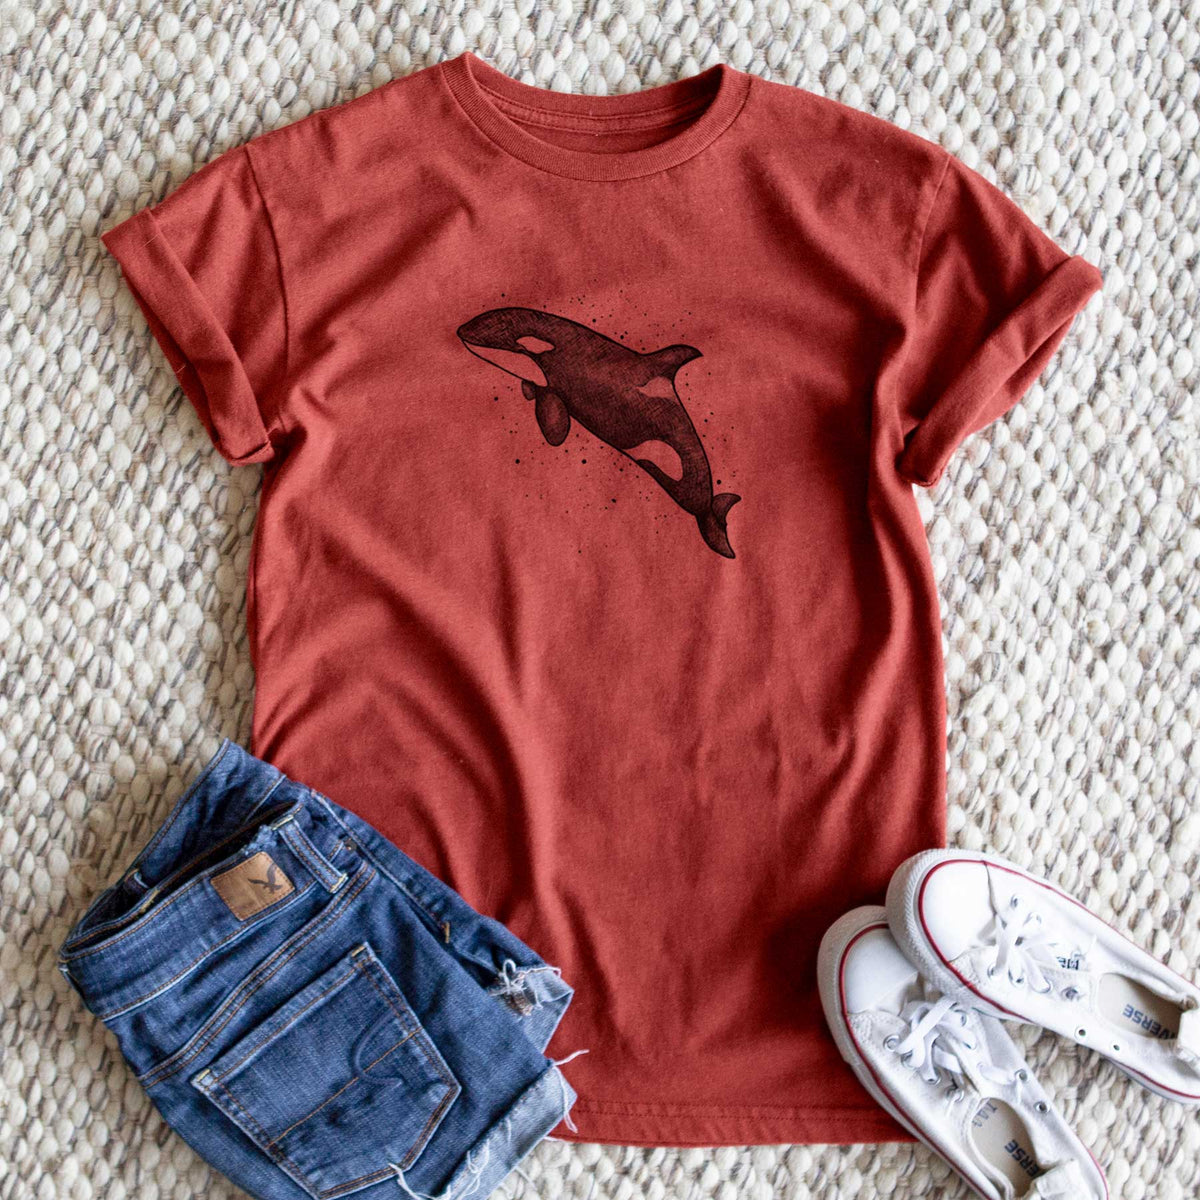 Orca Whale - Unisex Recycled Eco Tee  - CLOSEOUT - FINAL SALE